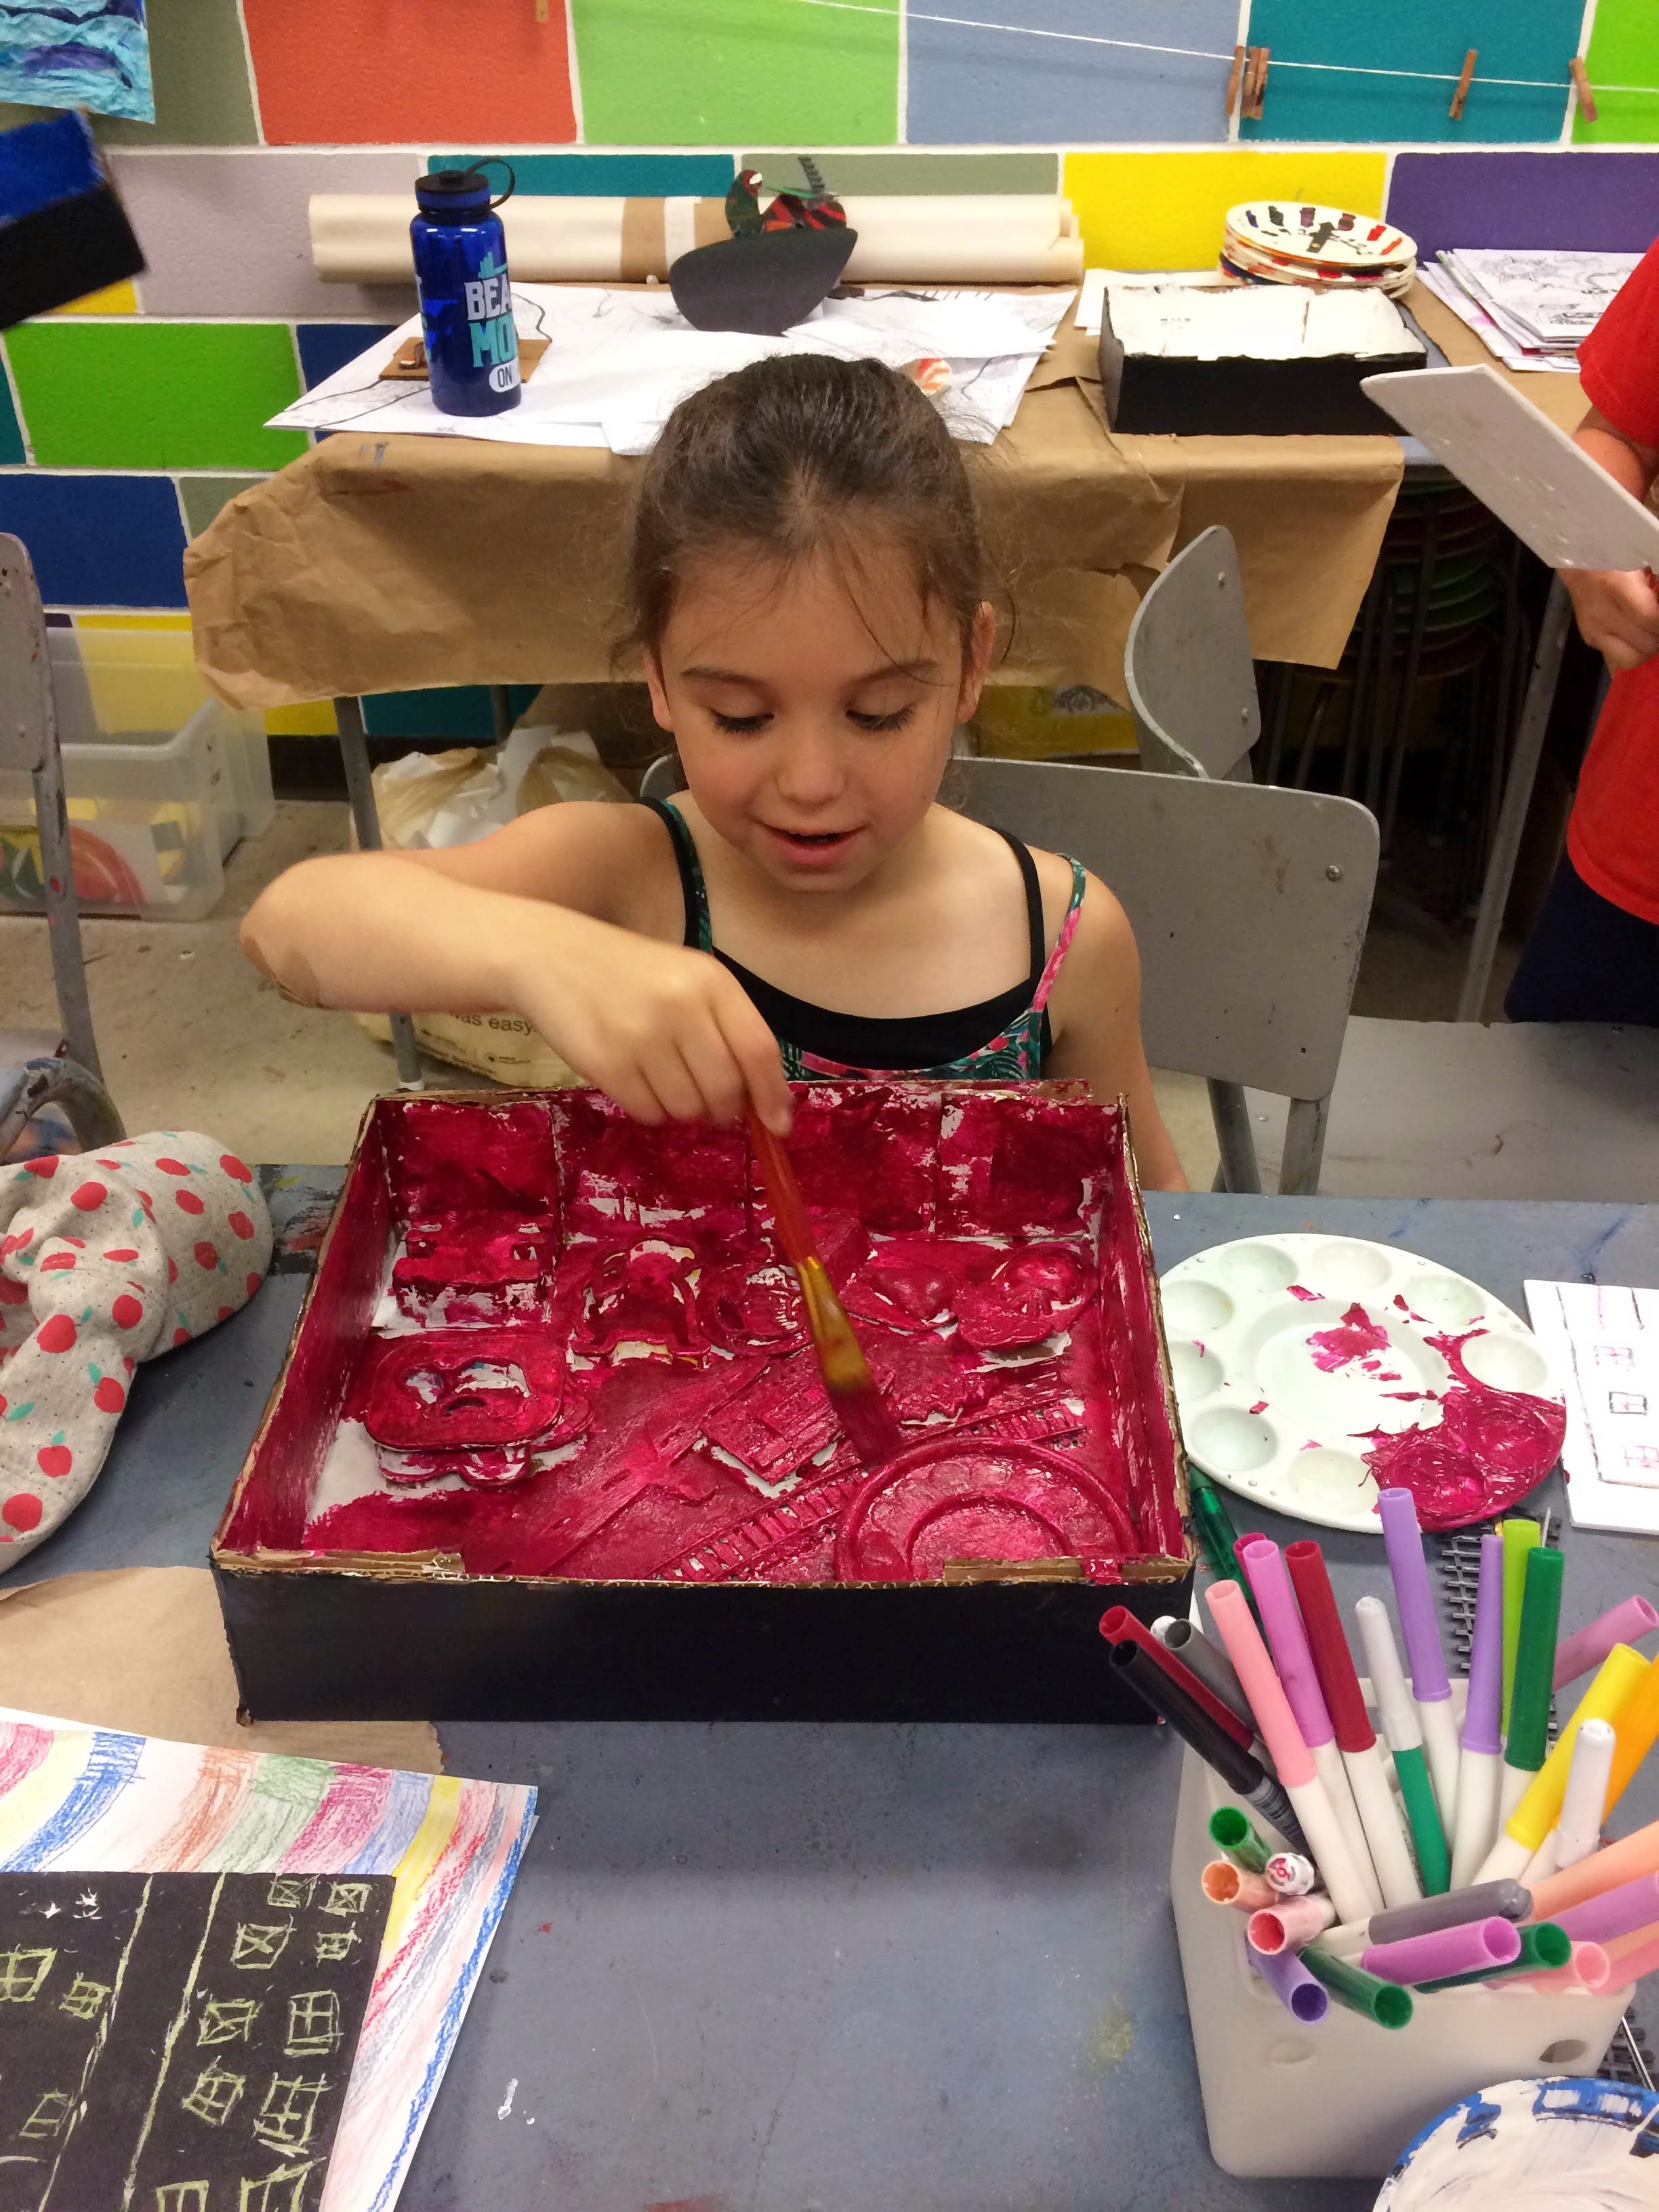 A young girl concentrates on applying bright magenta paint to the inside of a box filled with textured materials 